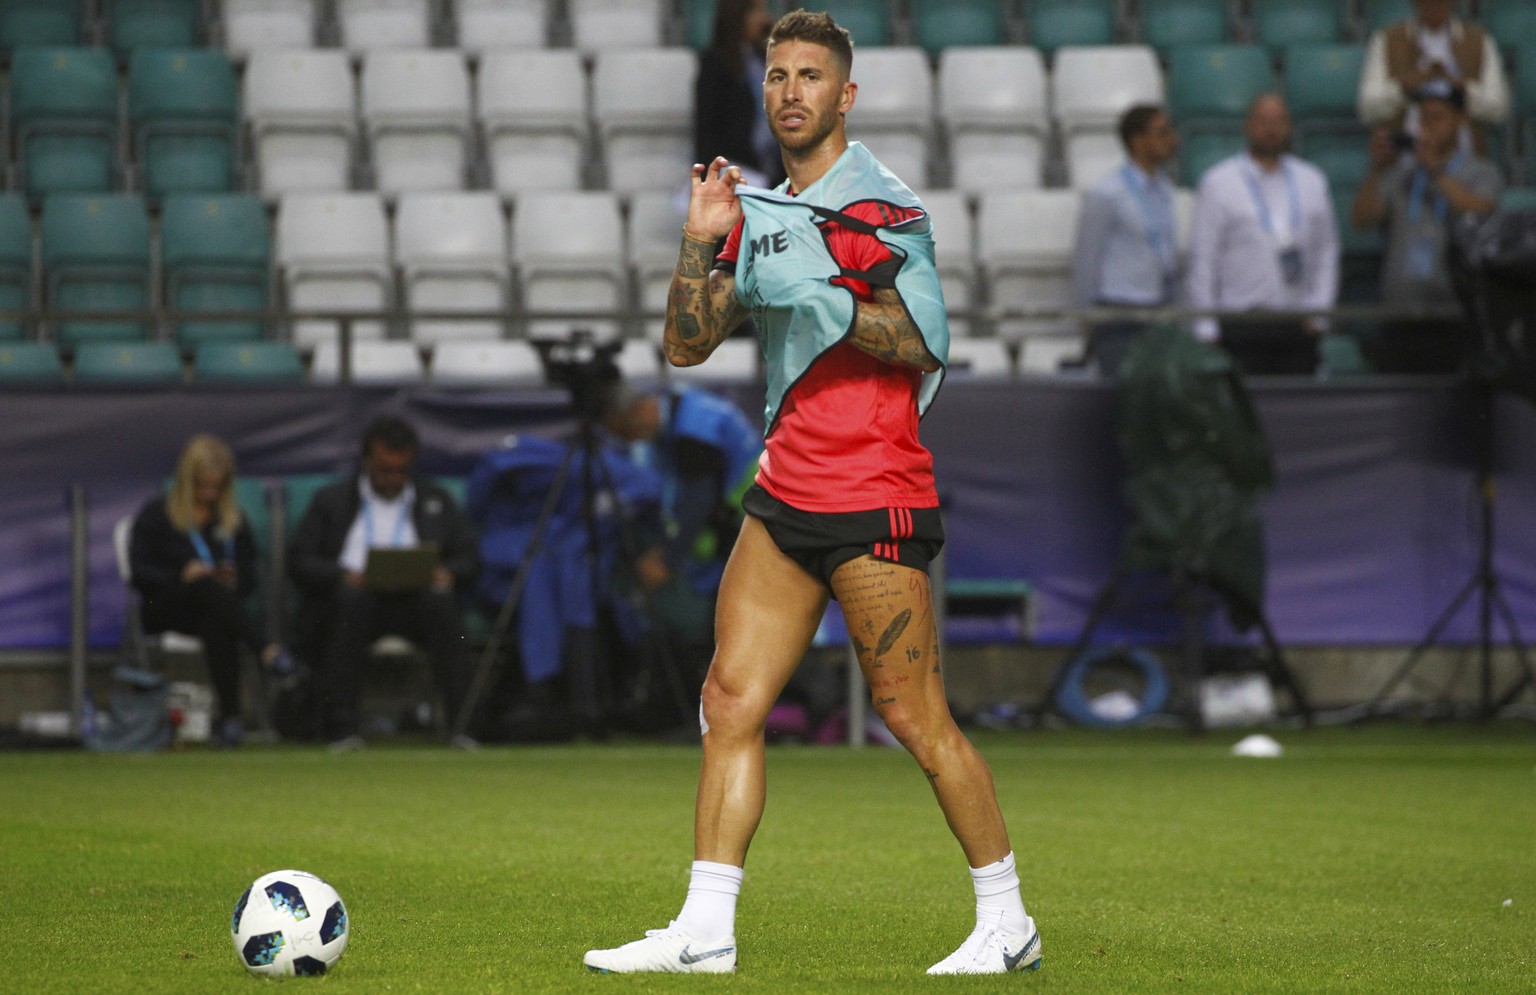 epa06949840 Sergio Ramos of Real Madrid in action during a training session at the Lillekula Stadium in Tallinn, Estonia, 14 August 2018. Atletico Madrid will face Real Madrid in the UEFA Super Cup Fi ...